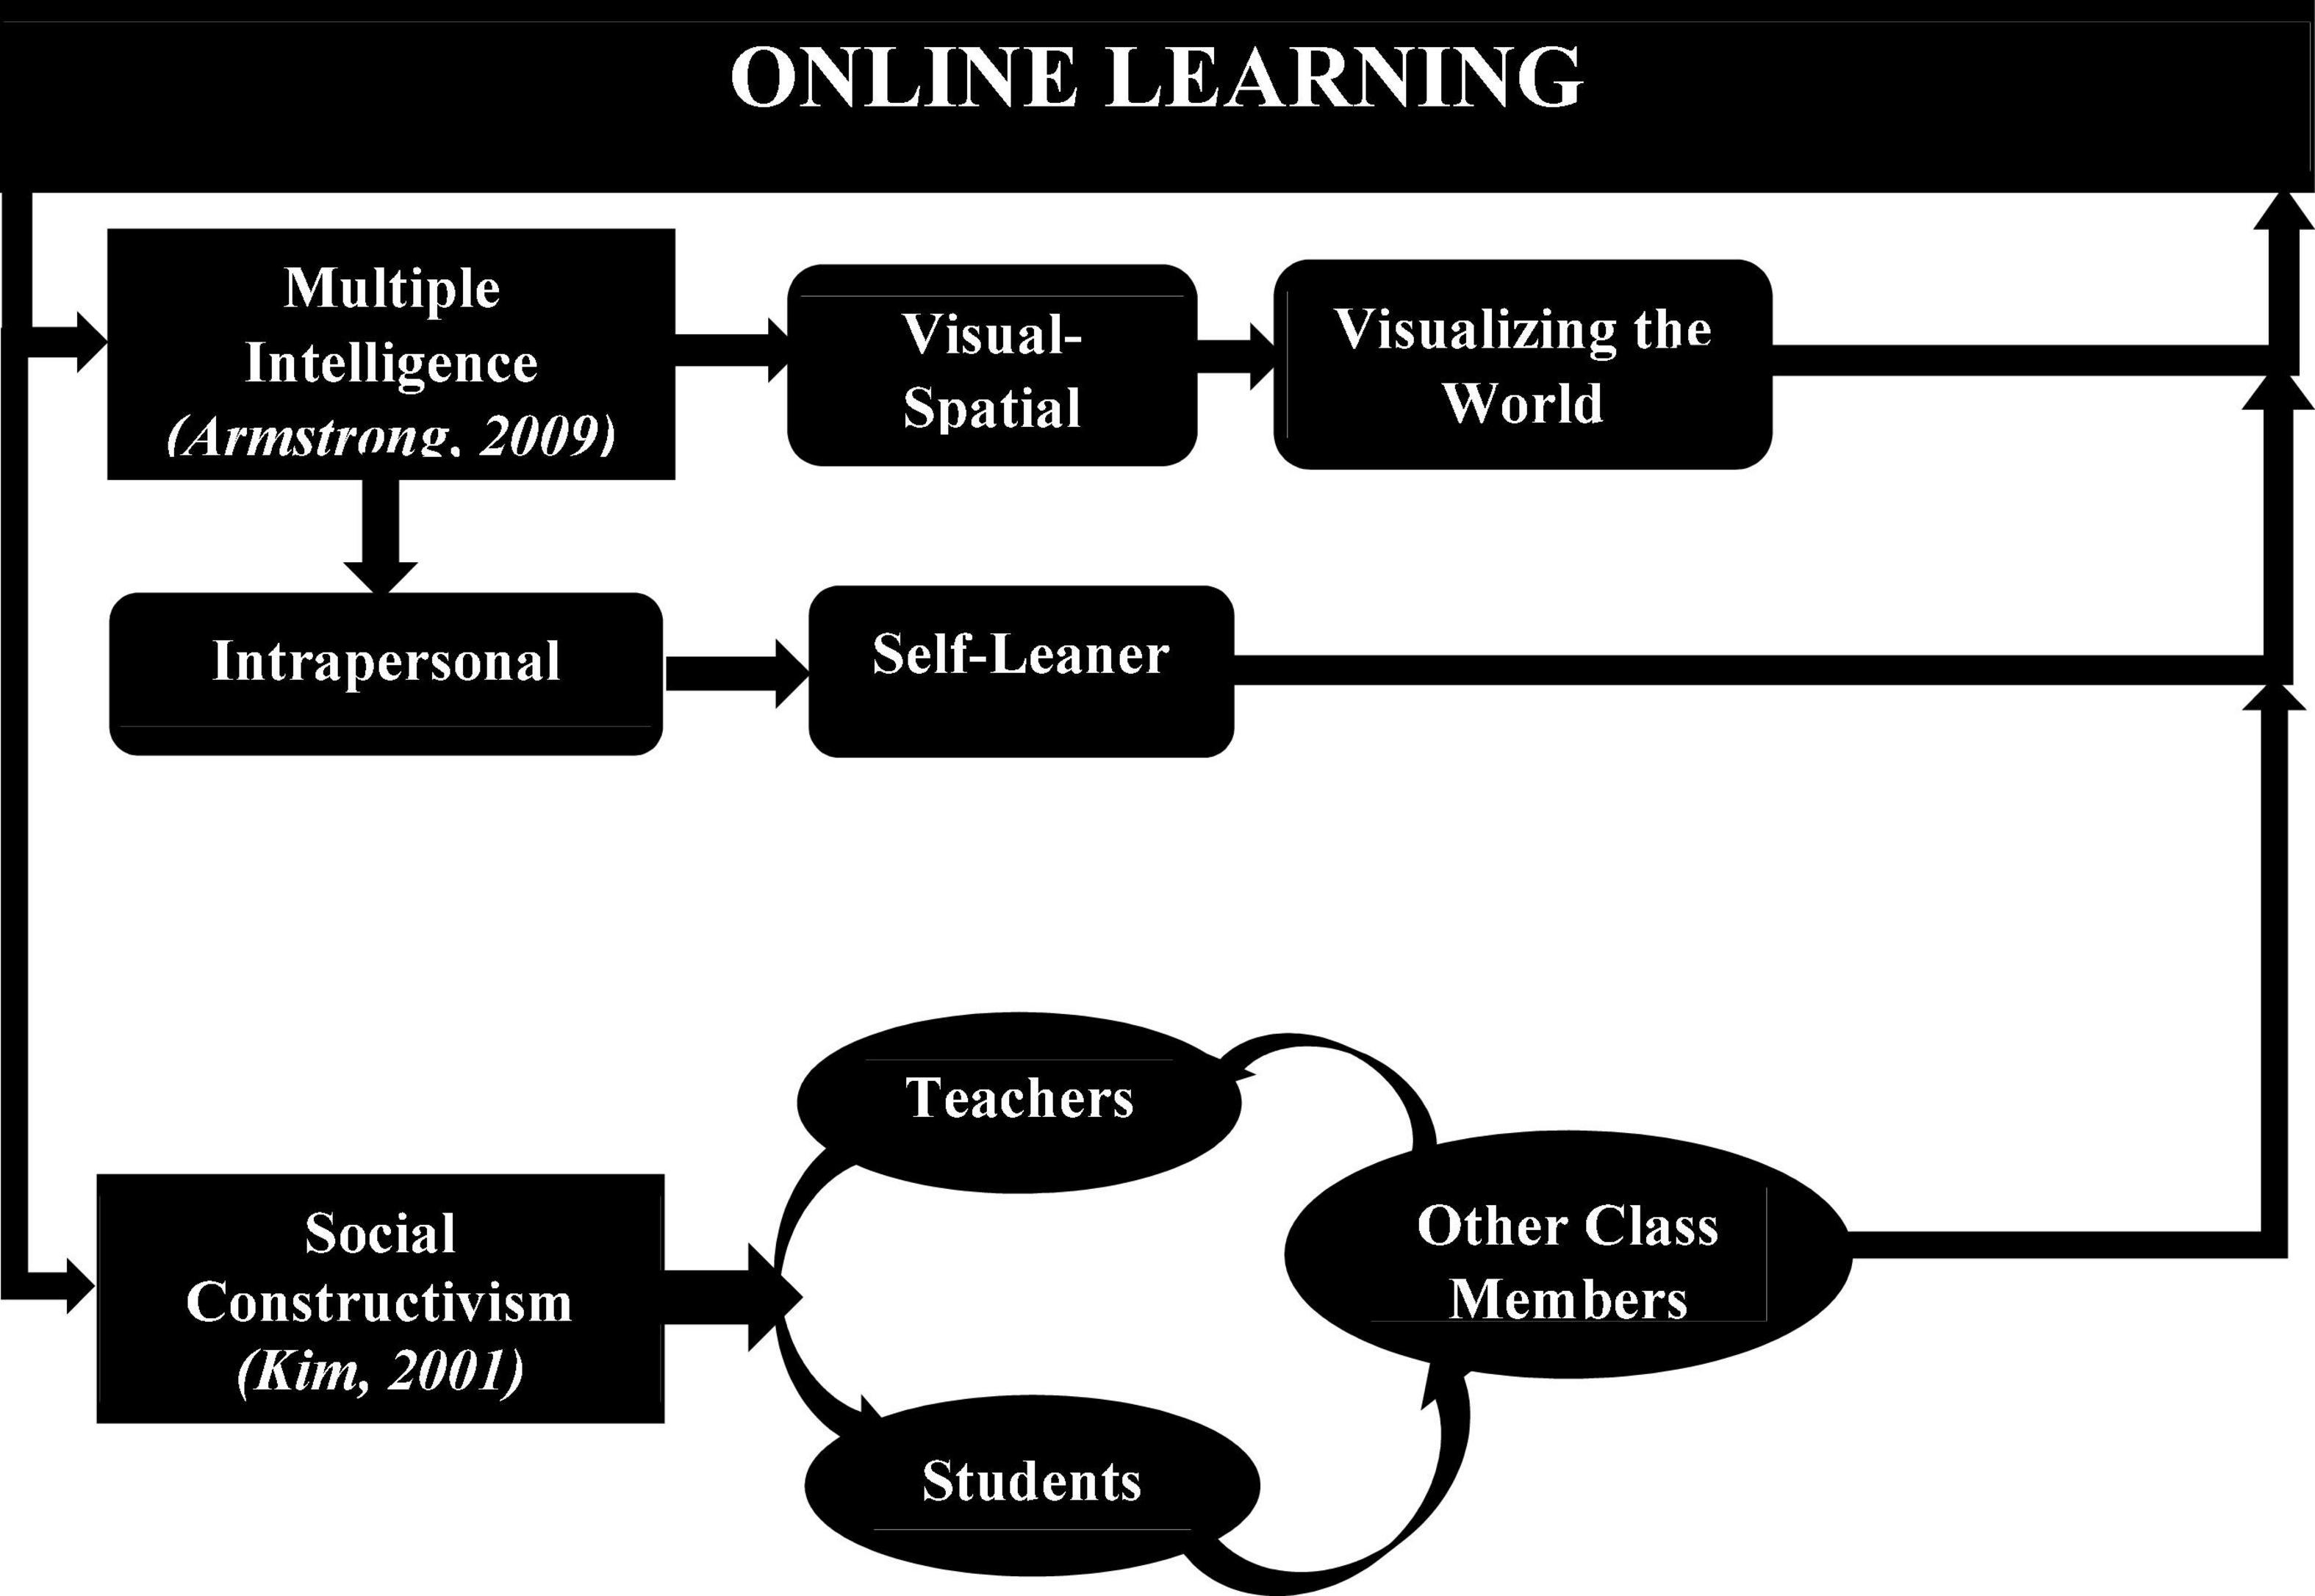 Growth in online education. Are providers ready?